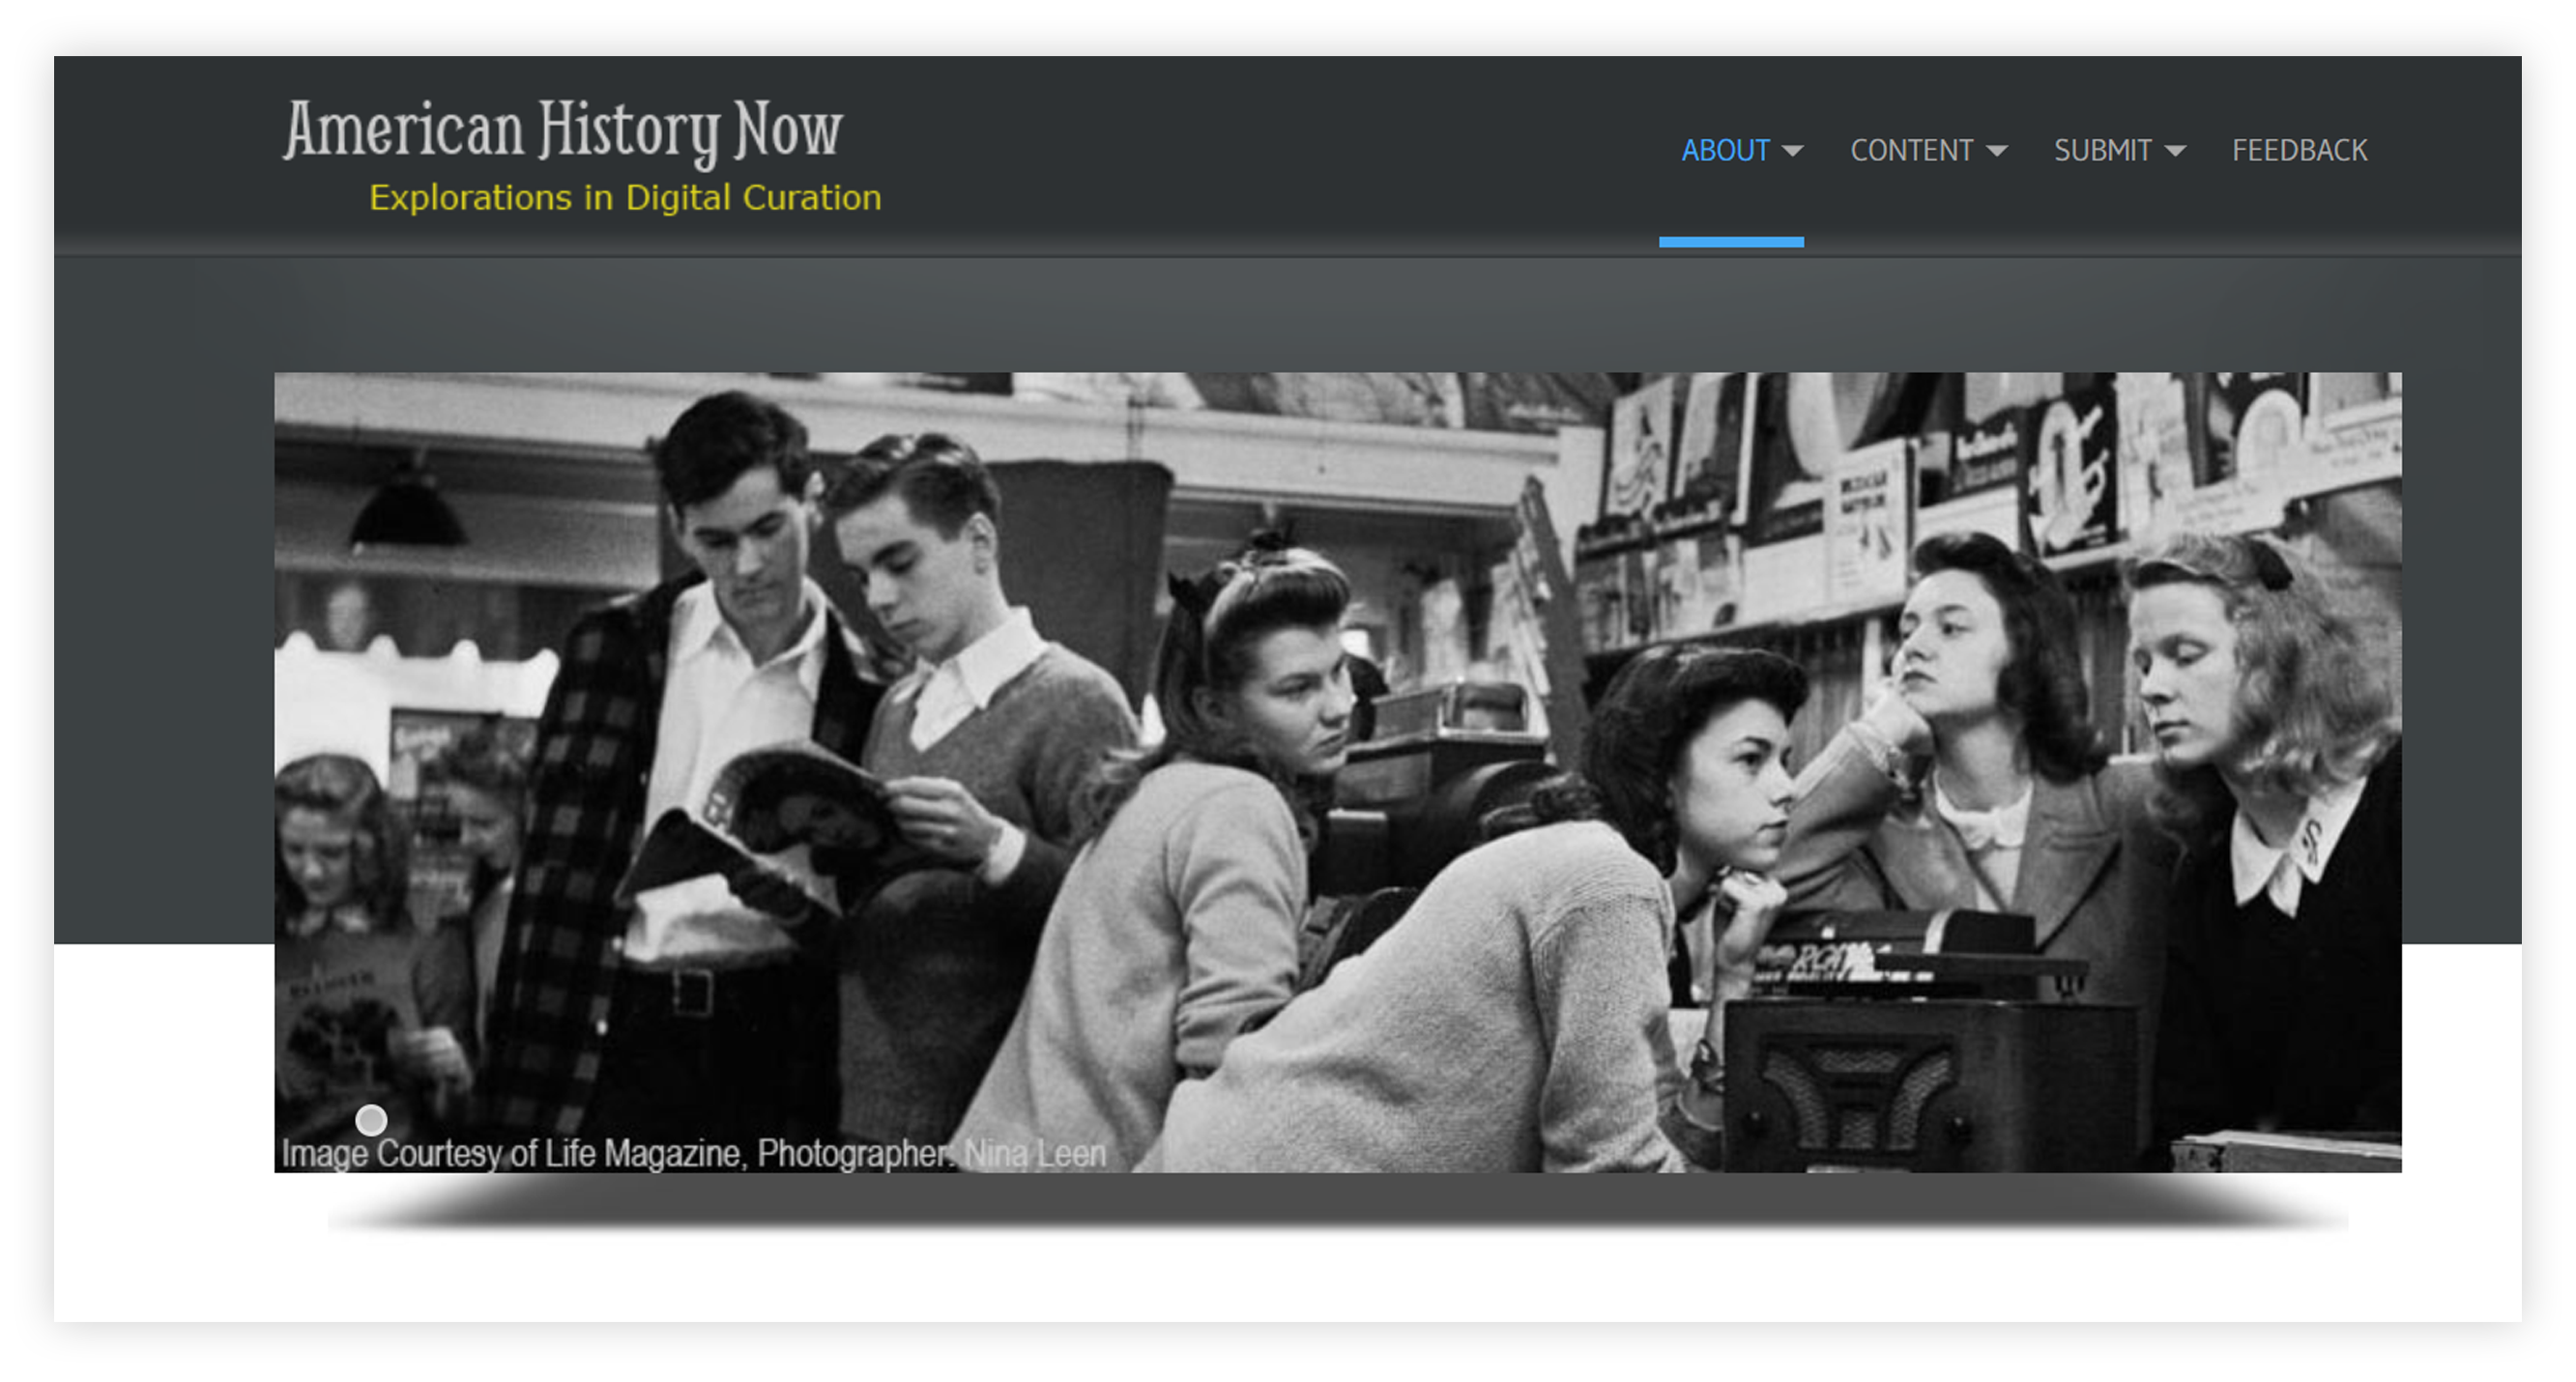 A screengrab of the American History Now website navigation and hero image.